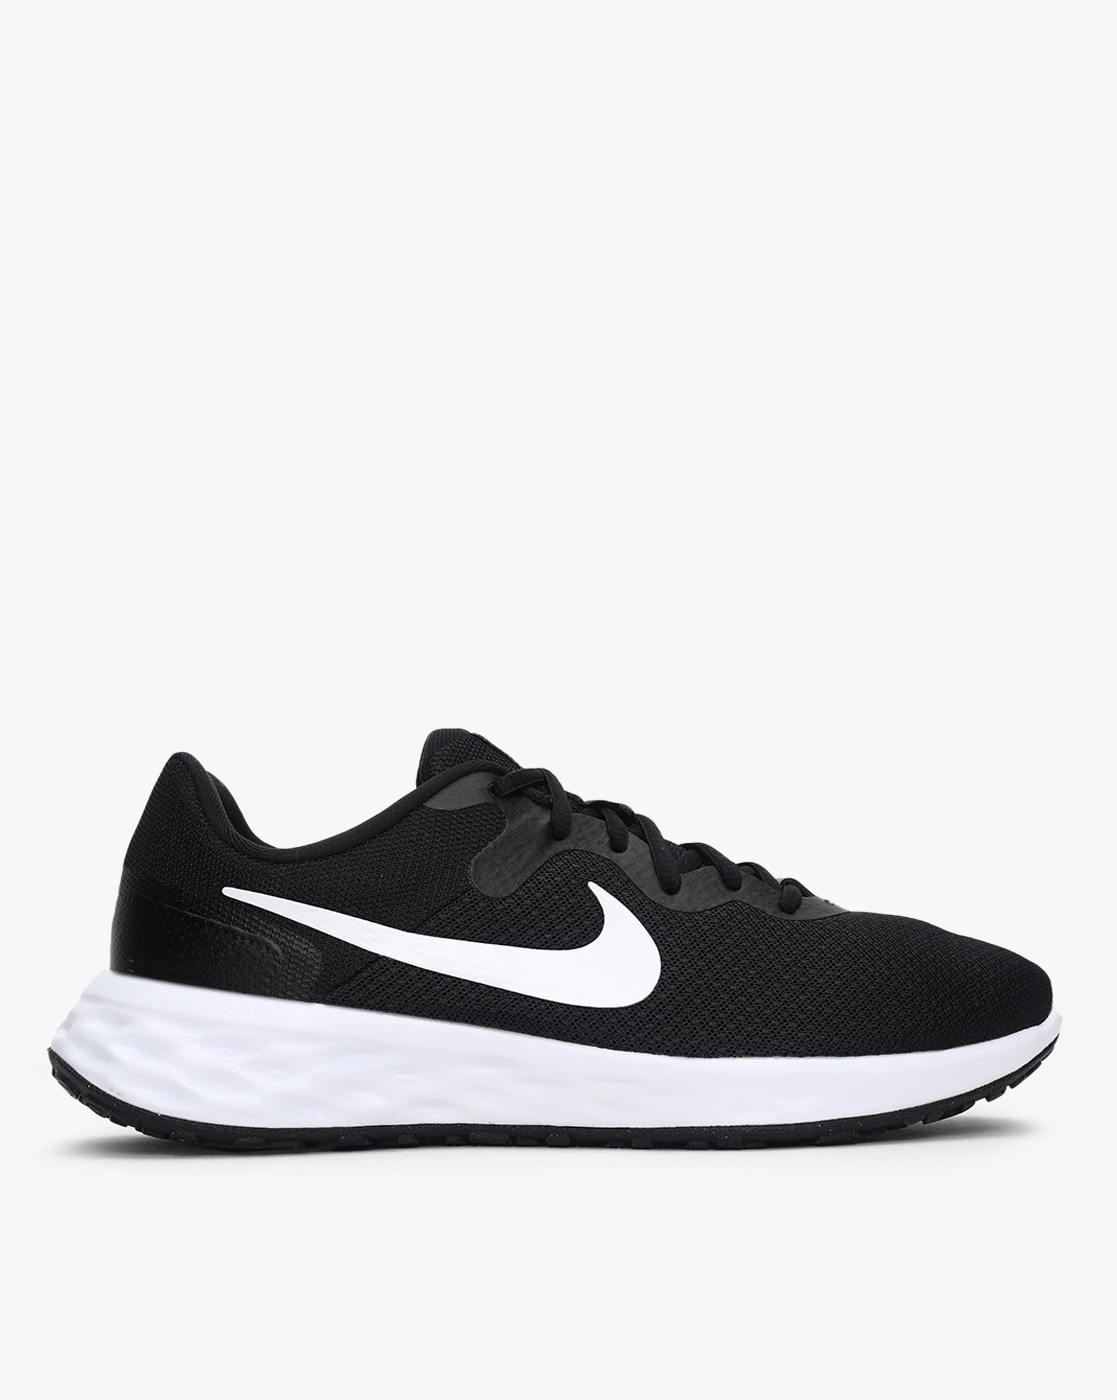 Where to Buy Nike Shoes in Singapore – Dior Nike Shoes Air Max, Nike Space Hippie 04 Women’s Shoes, Nike Kids’ Basketball Shoes NZ